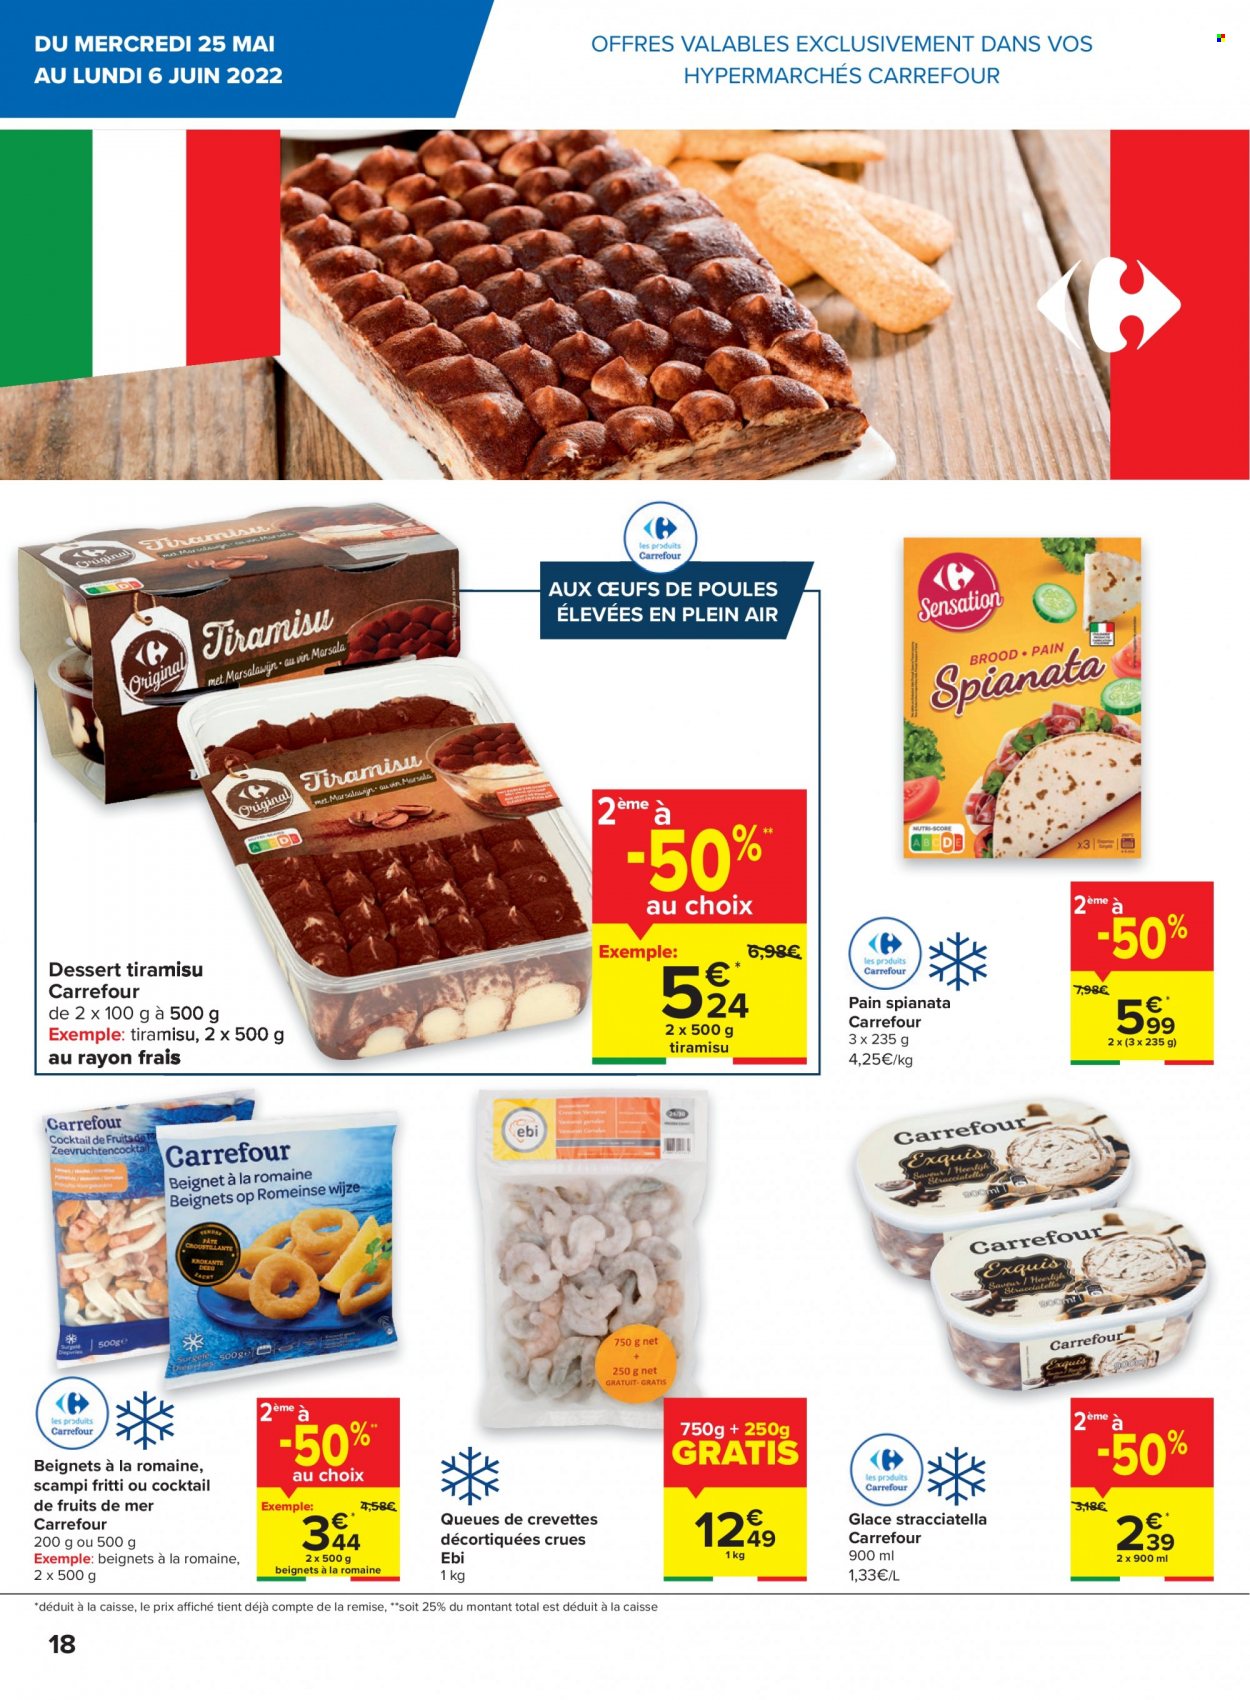 Catalogue Carrefour hypermarkt - 25.5.2022 - 31.5.2022. Page 18.